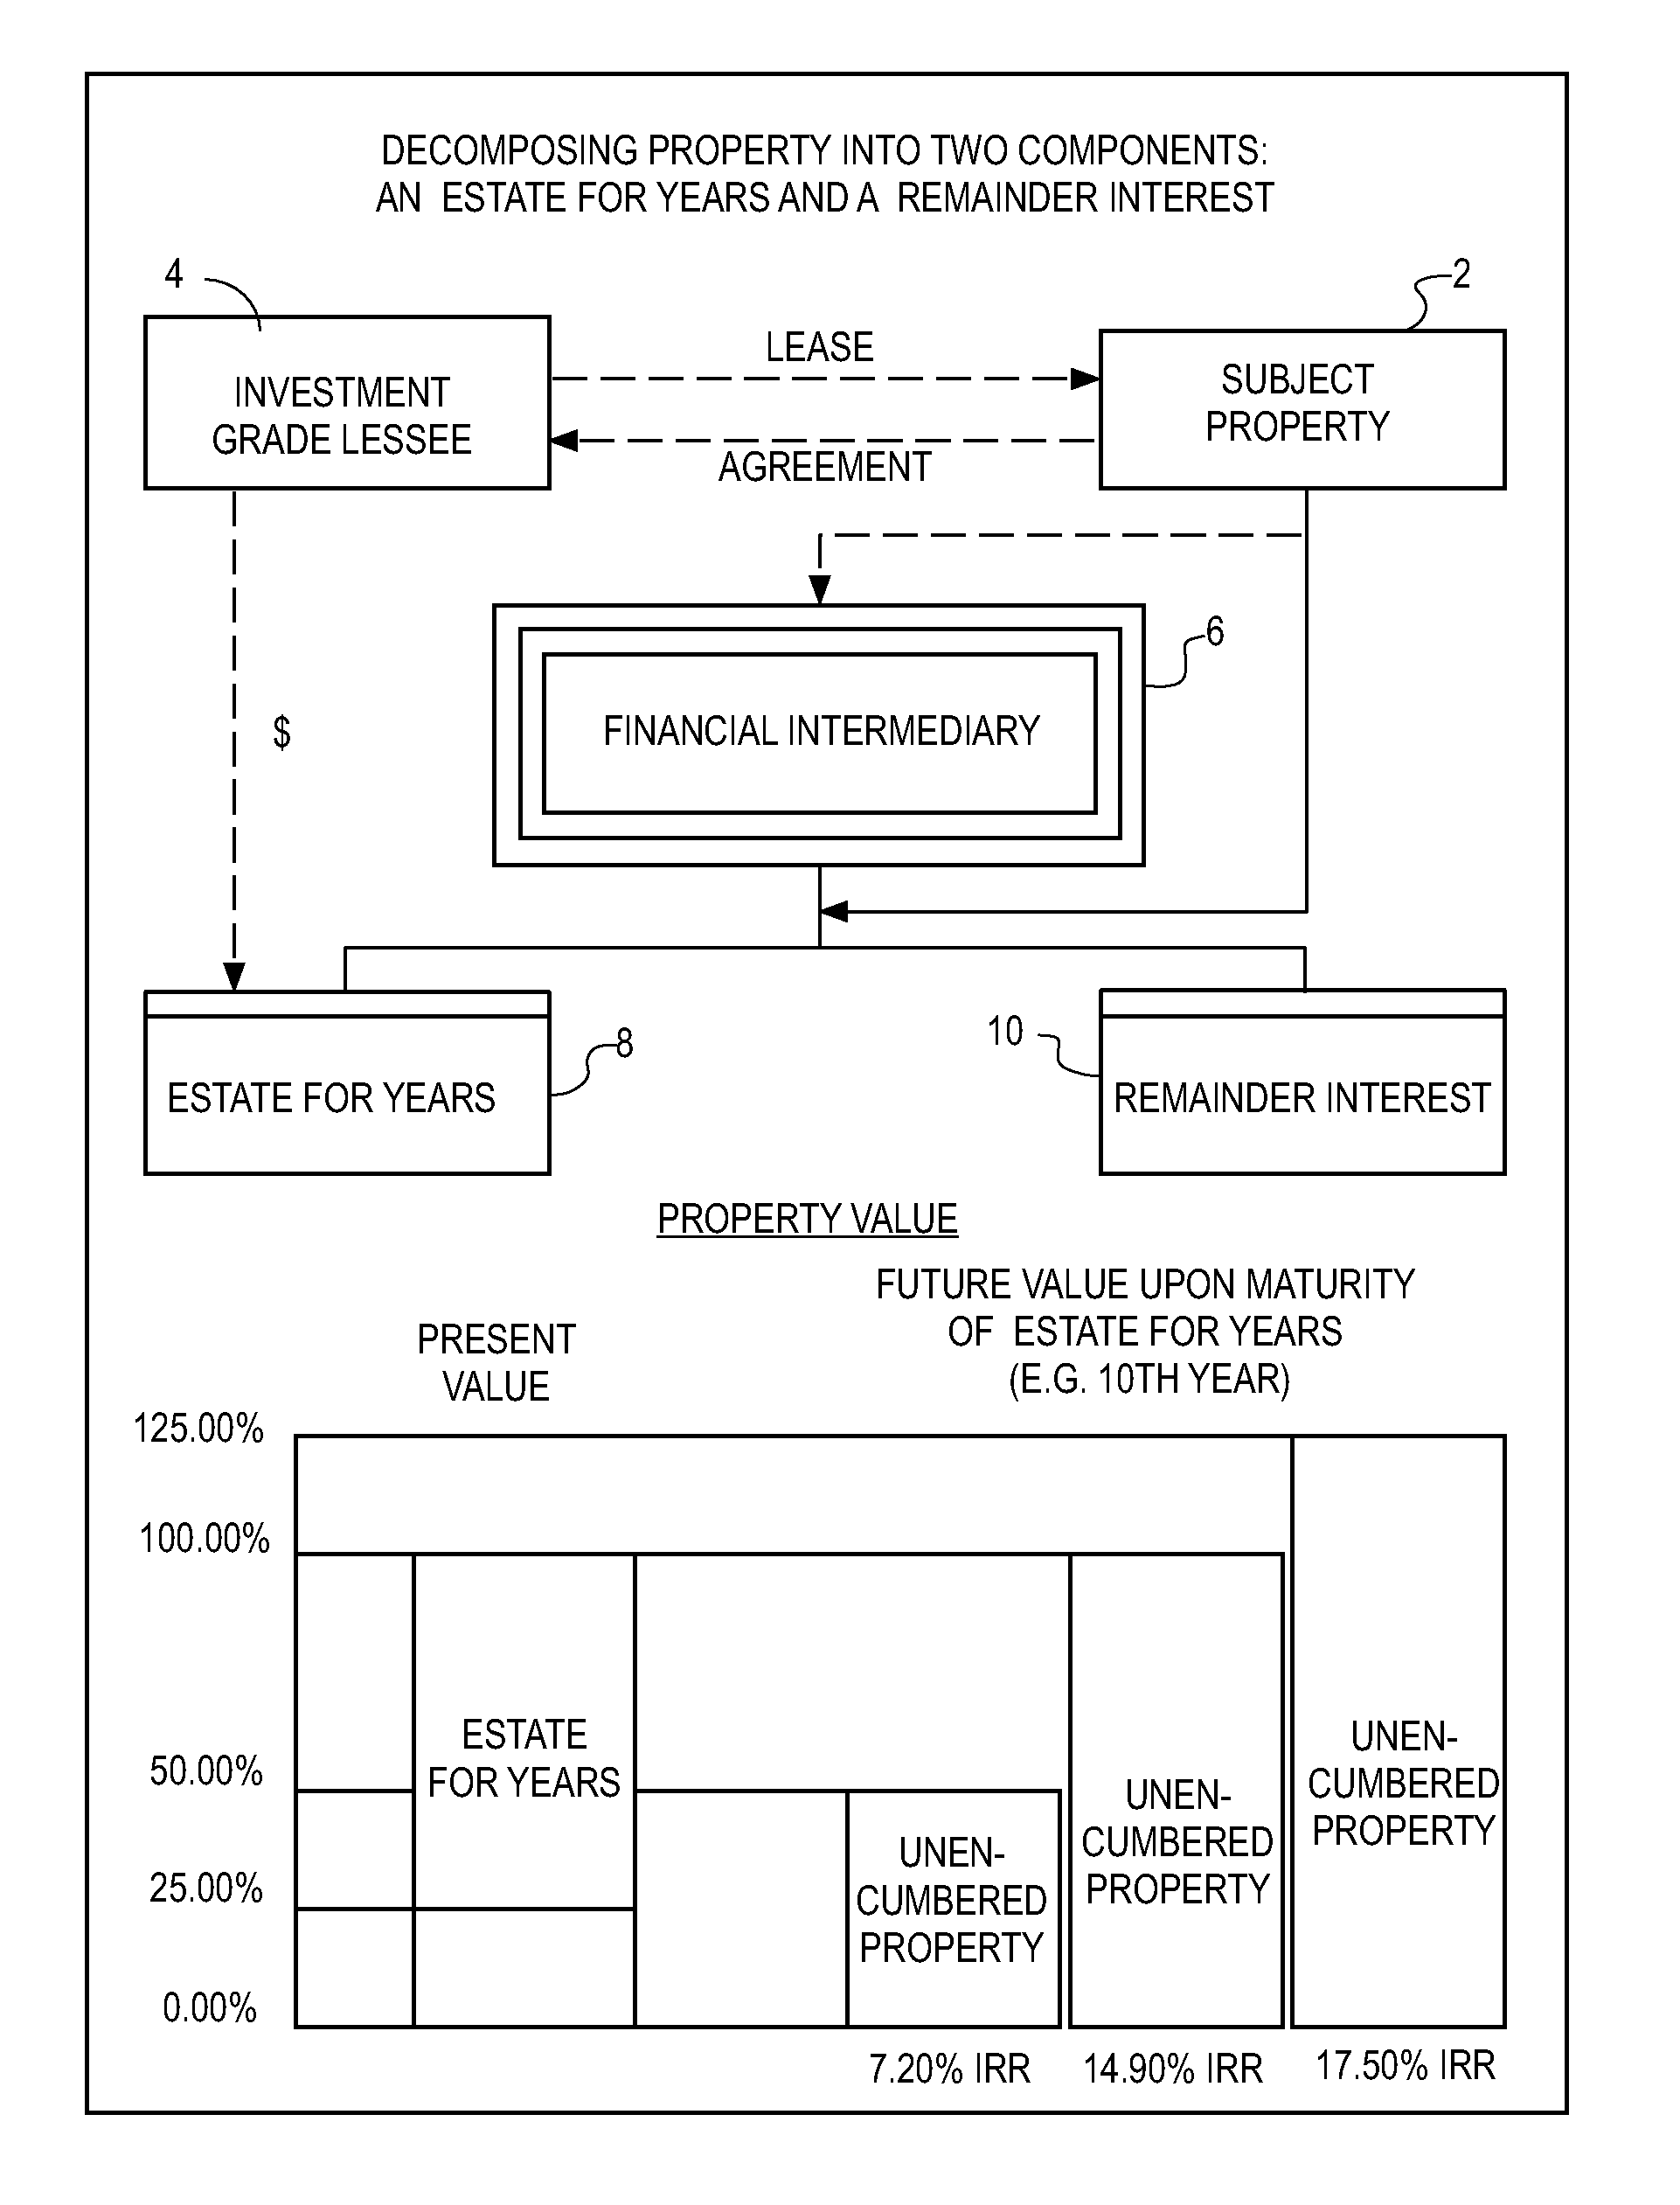 Apparatus and process to generate output